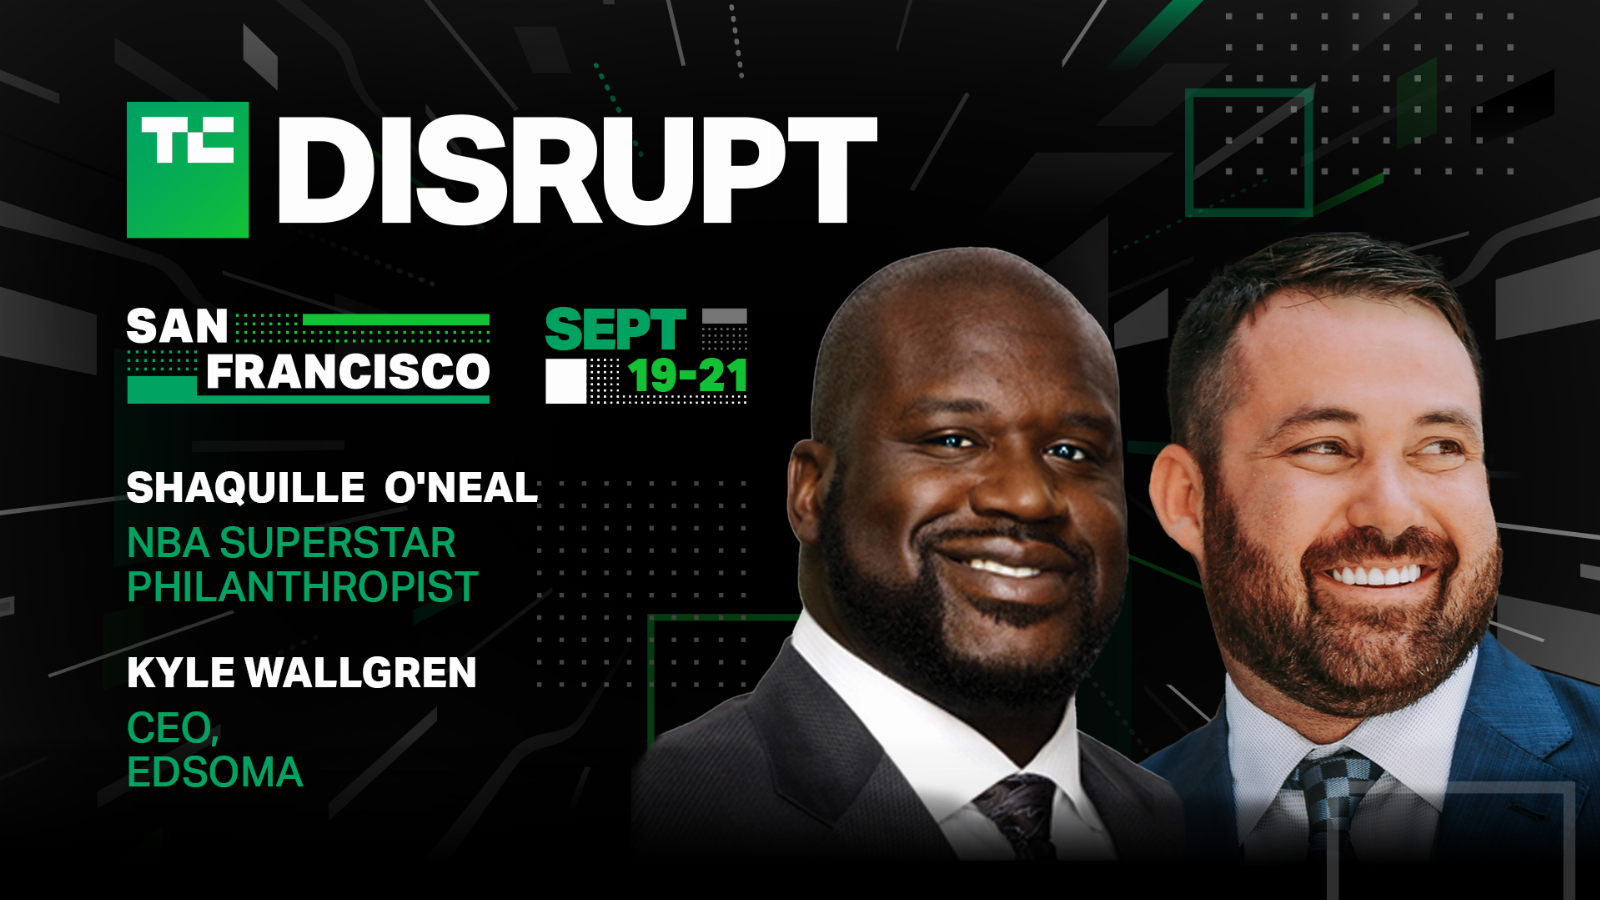 Shaquille O’Neal will discuss investing in Edsoma, life as a mogul and more at Disrupt